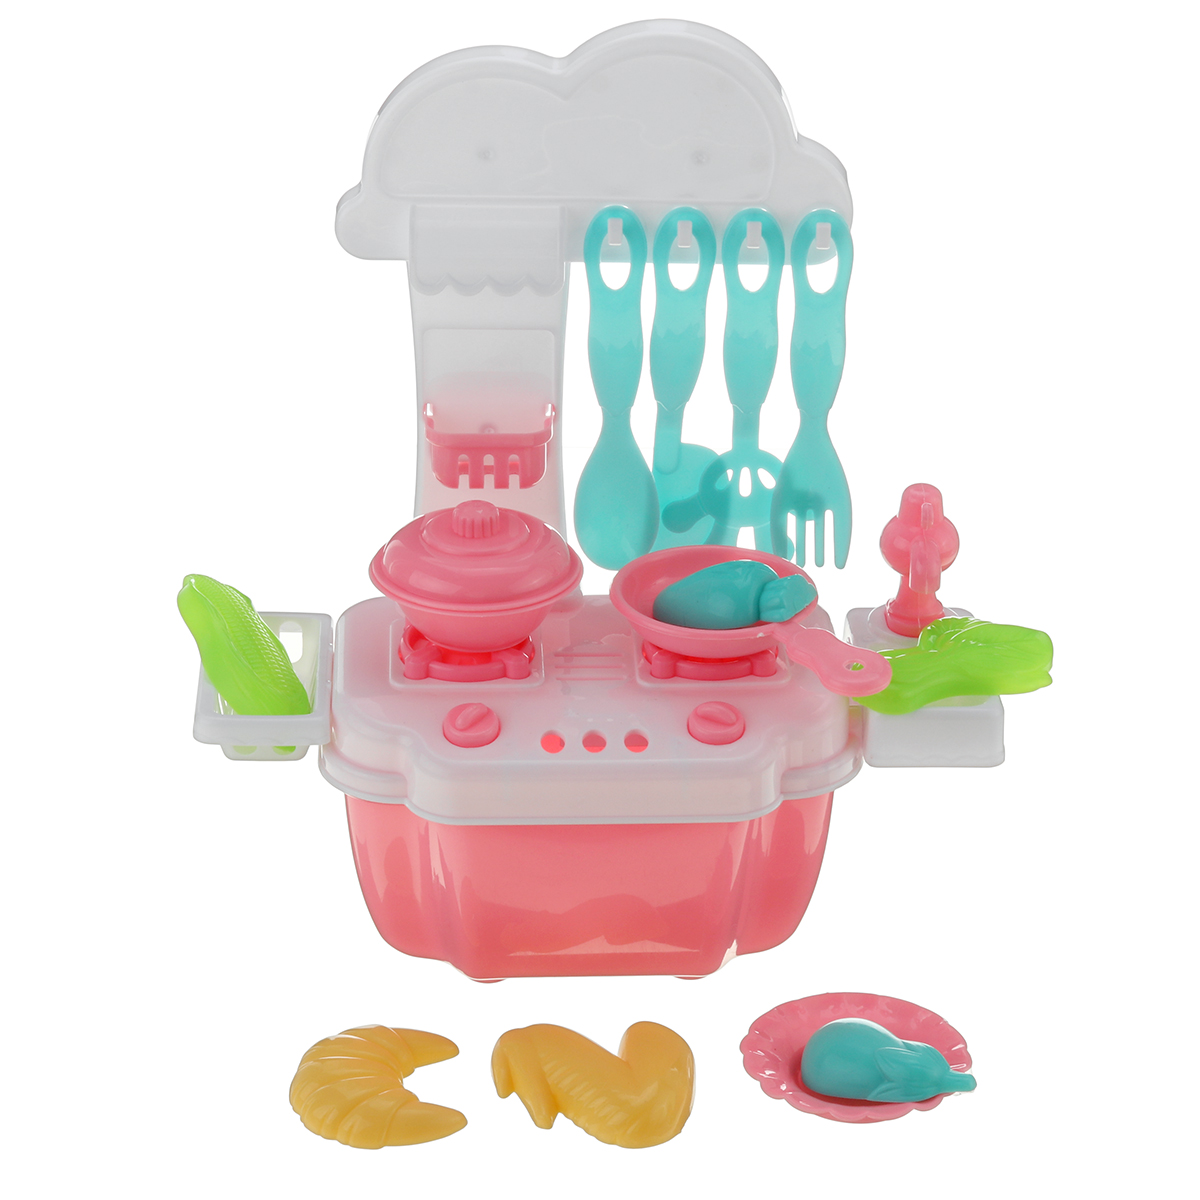 Kid-Play-House-Toy-Kitchen-Cooking-Pots-Pans-Food-Dishes-Cookware-Toys-1628195-9